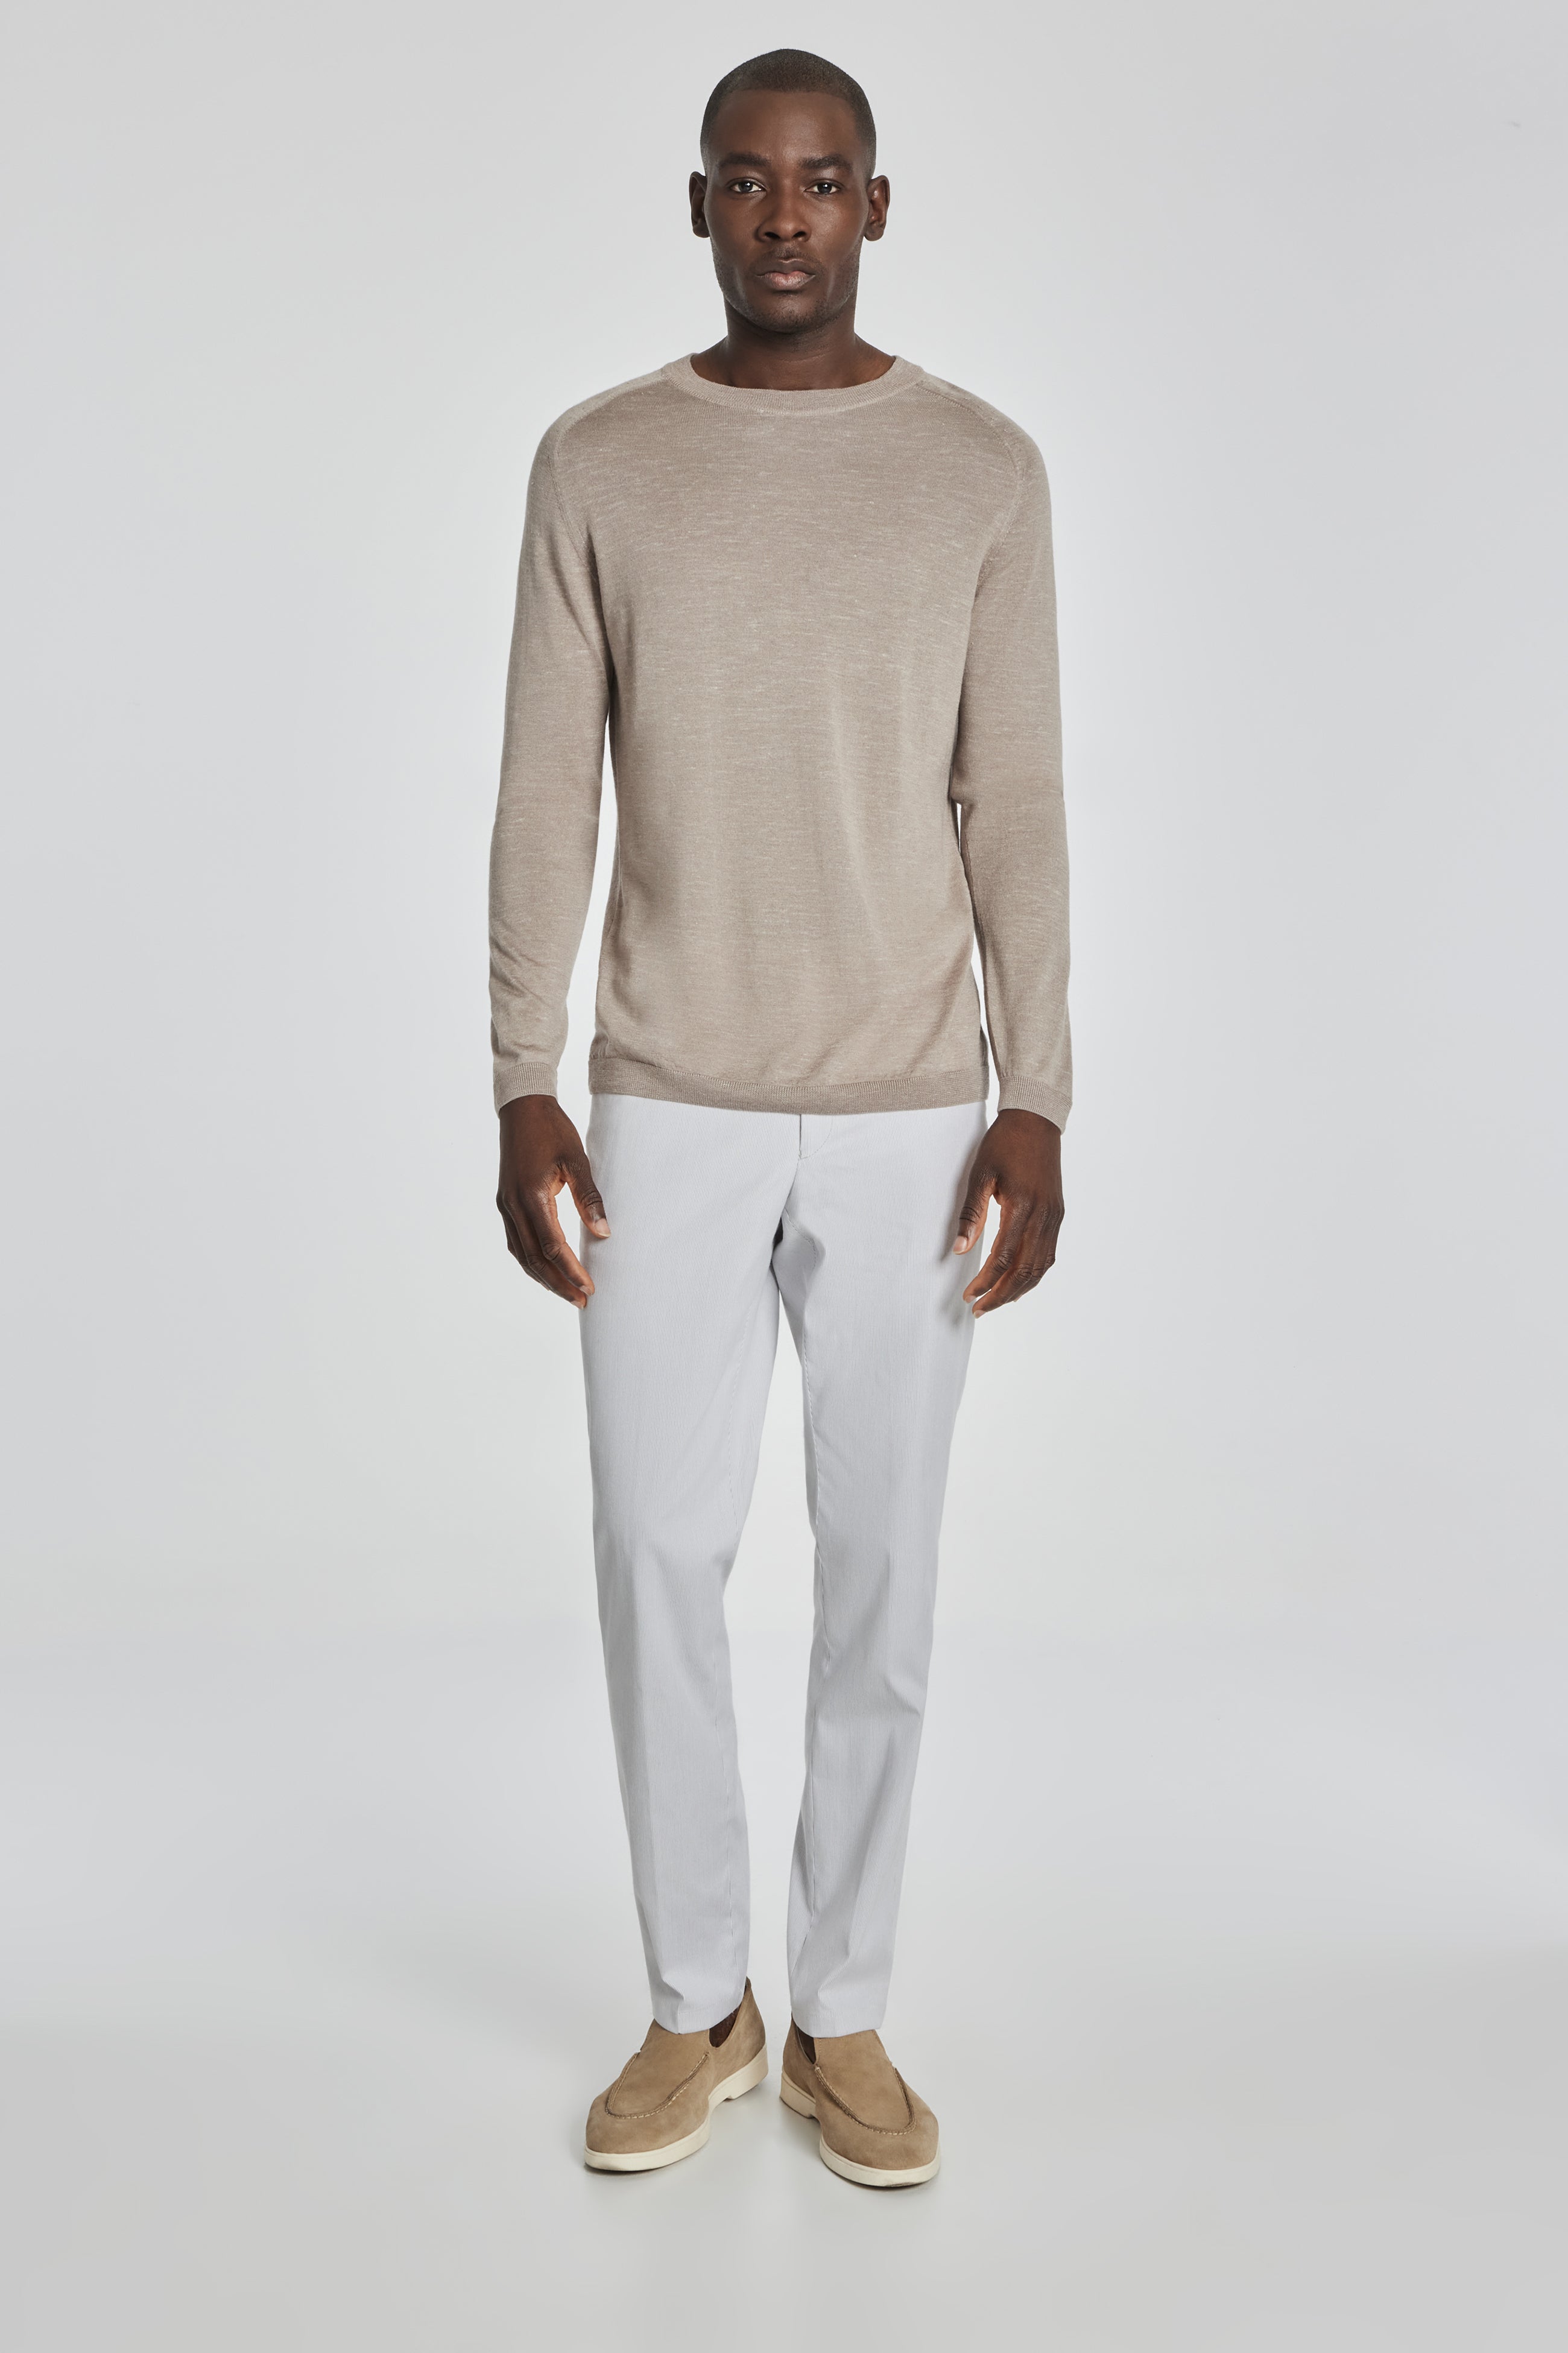 Alt view 5 Bailey Solid Merino Wool, Silk and Linen Long Sleeve Crew in Tan